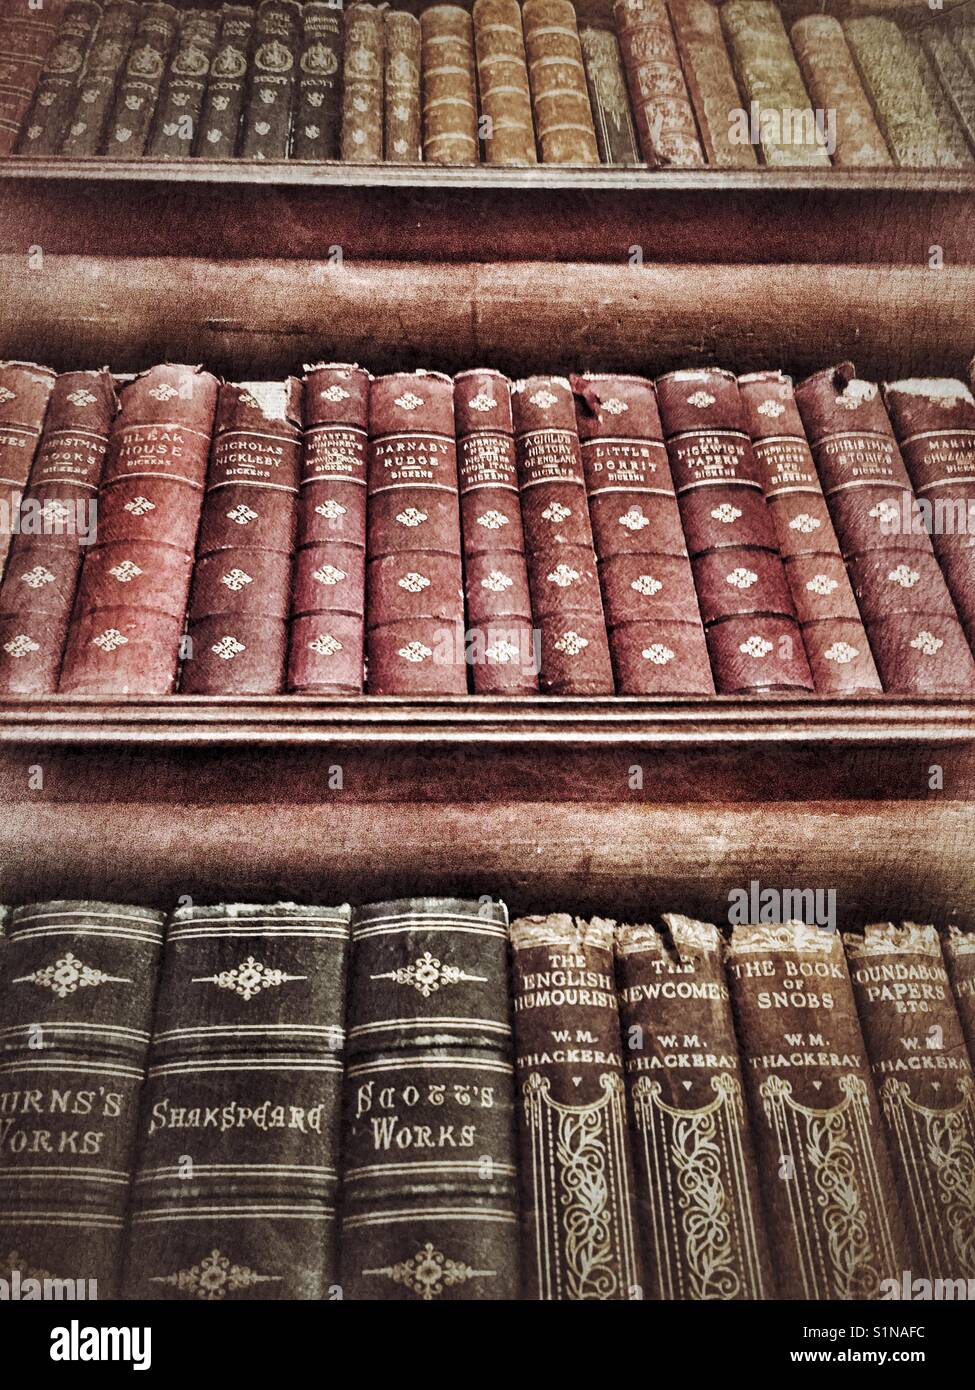 Antique Books On Shelves In A Bookcase Low Angle View Stock Photo